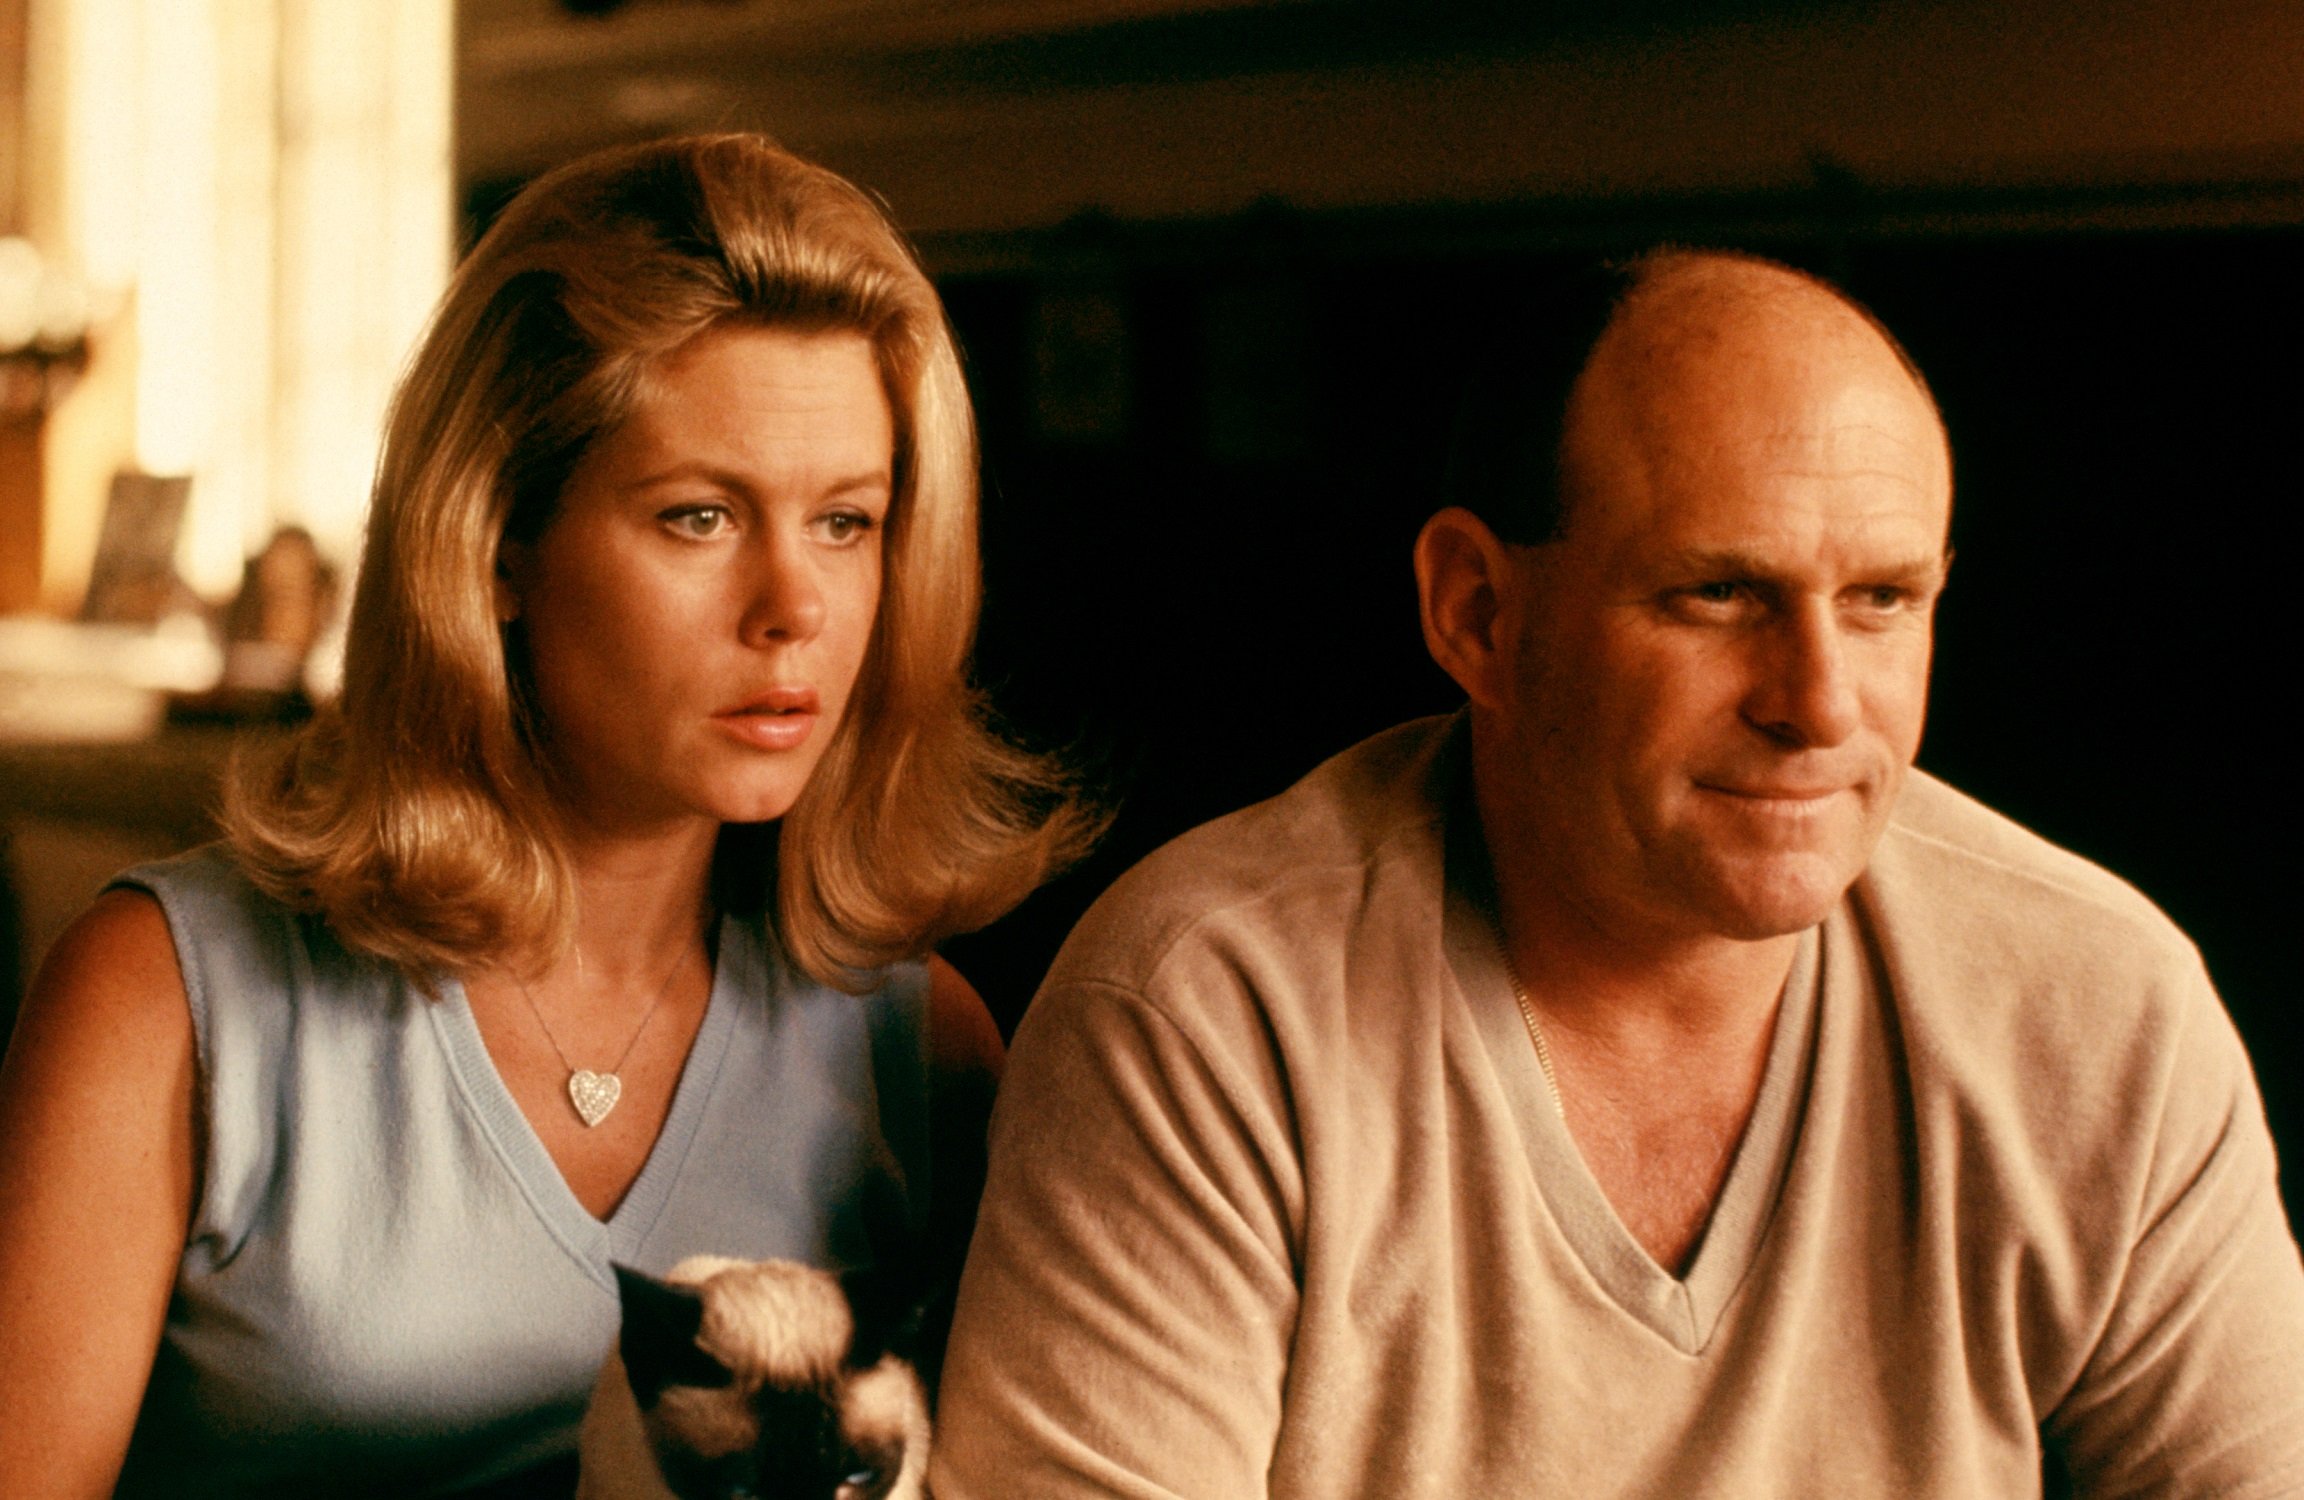 Elizabeth Montgomery and William Asher pose for a portrait at home circa 1966